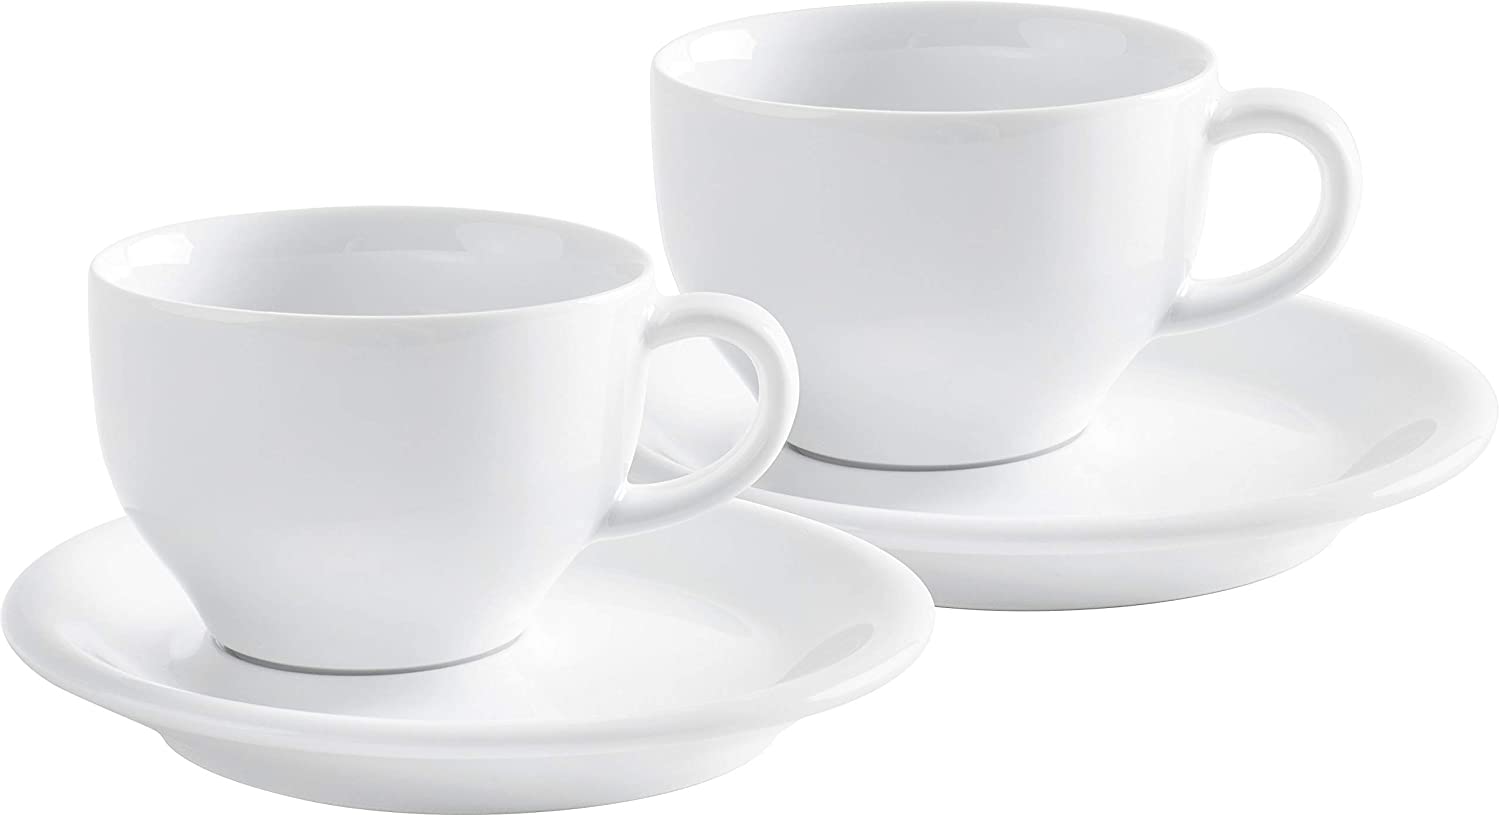 KAHLA Cafe Sommelier Cappuccino International, White Color, Set of 4 Pieces